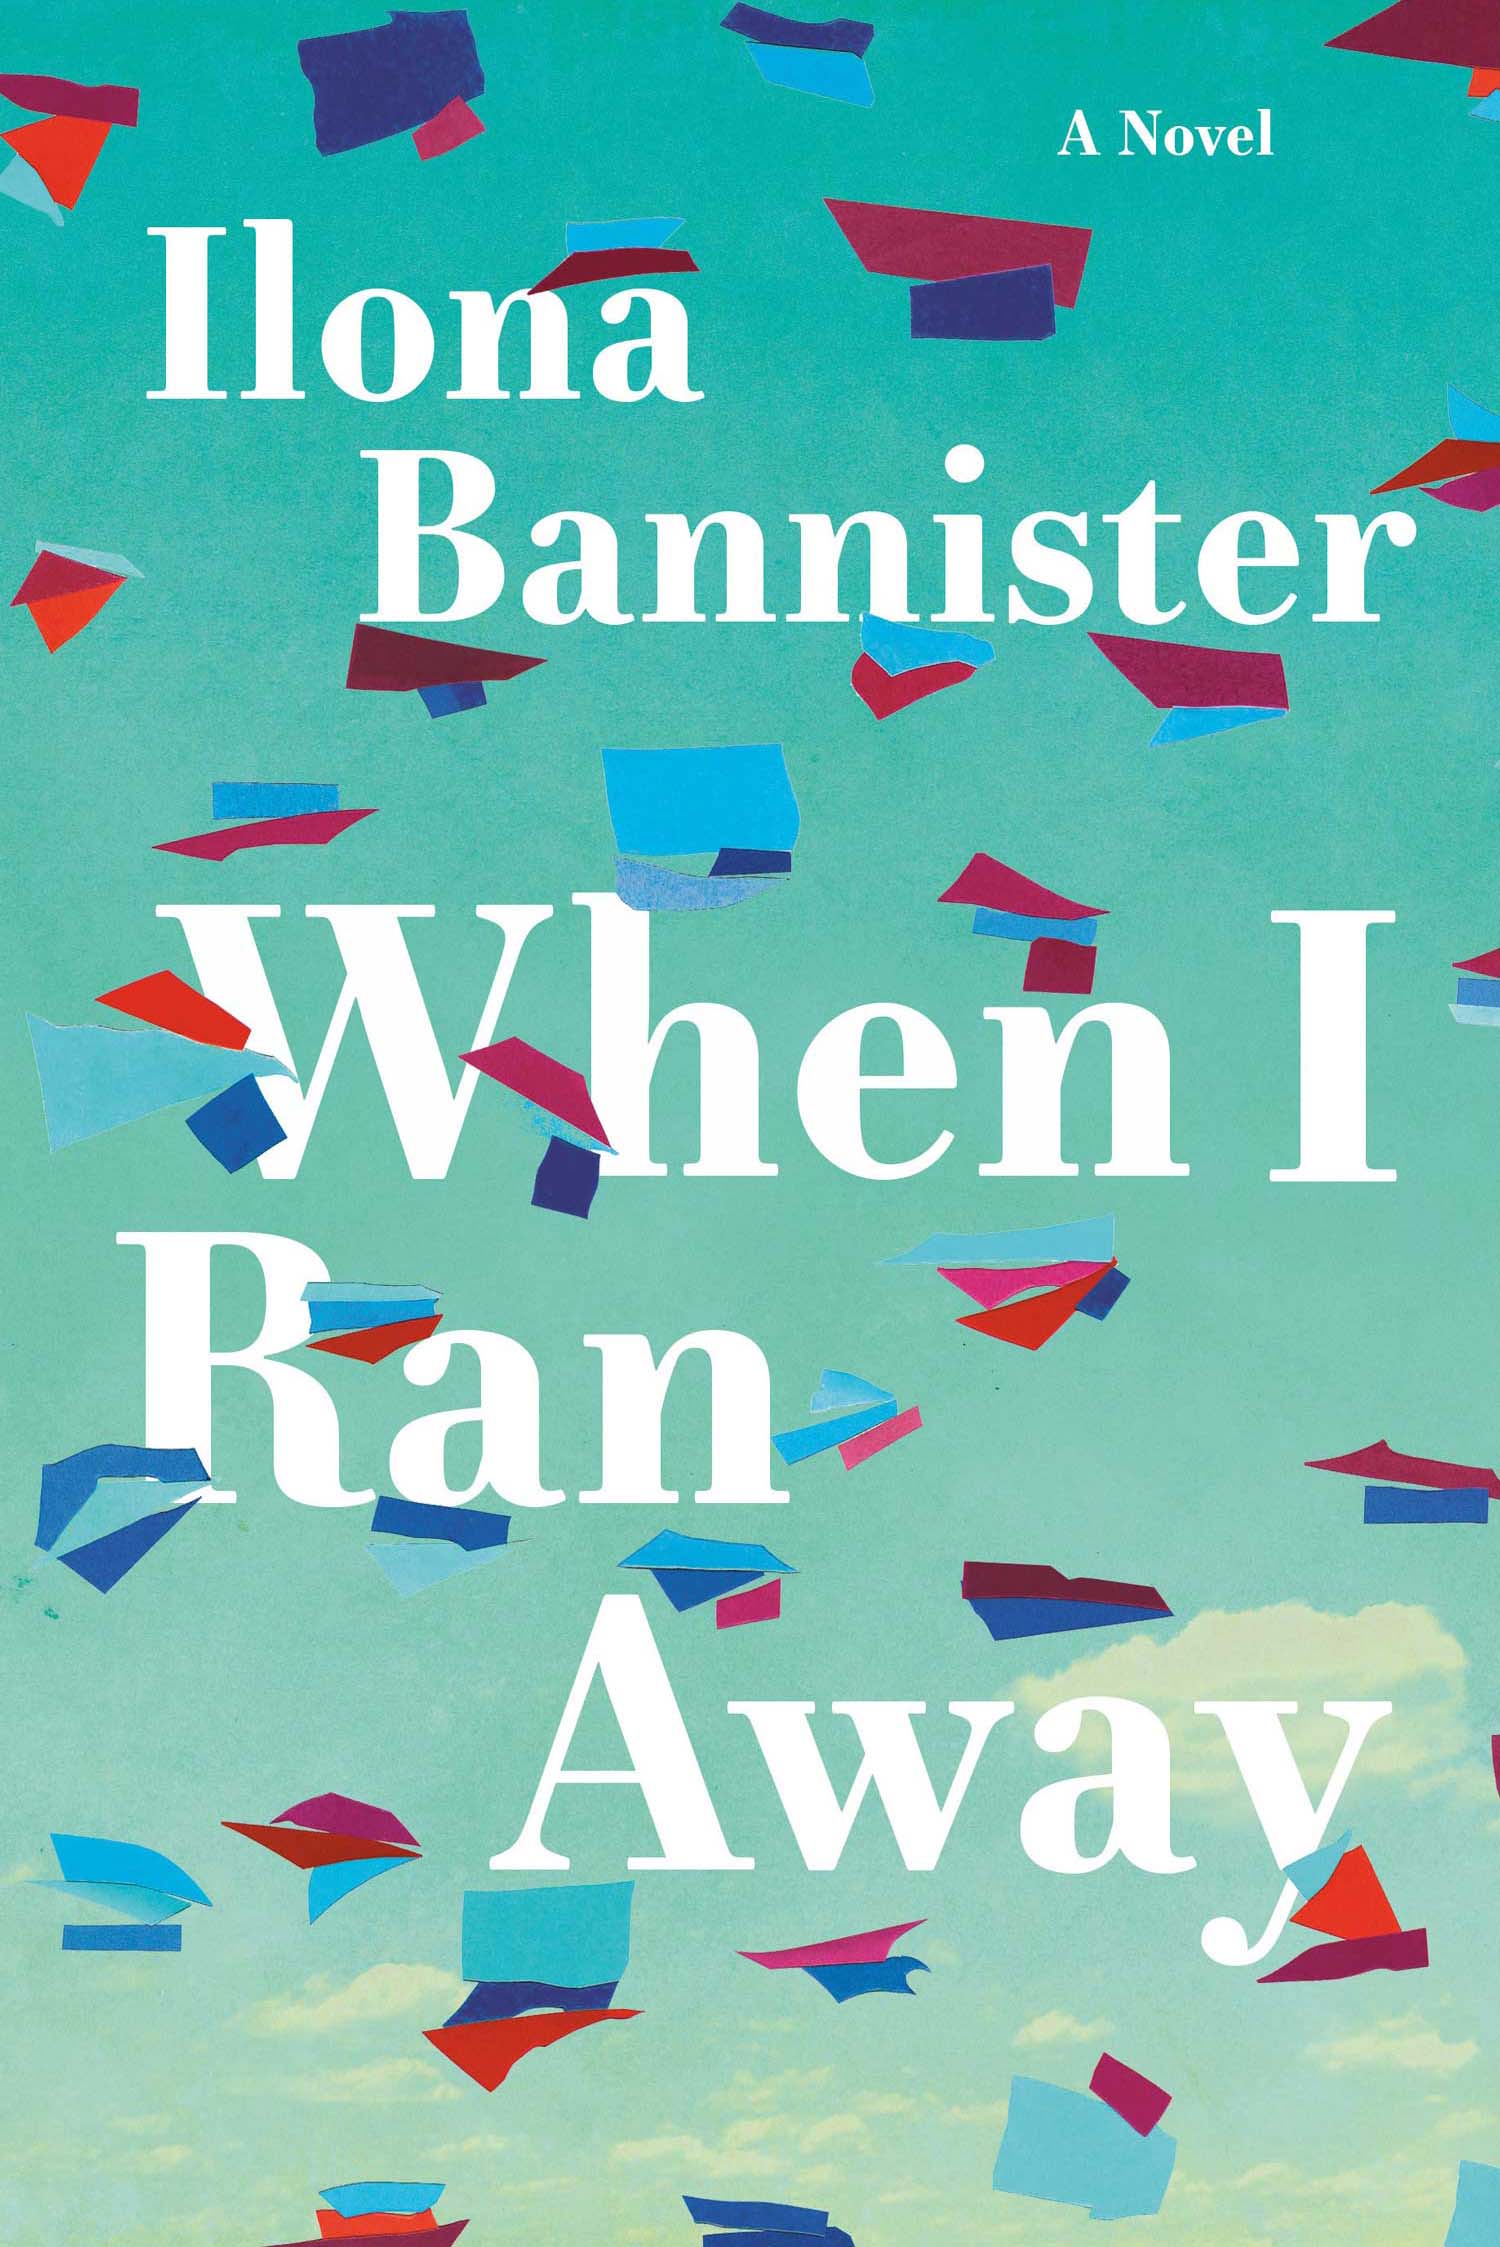 Book cover of When I Ran Away by Ilona Bannister '07